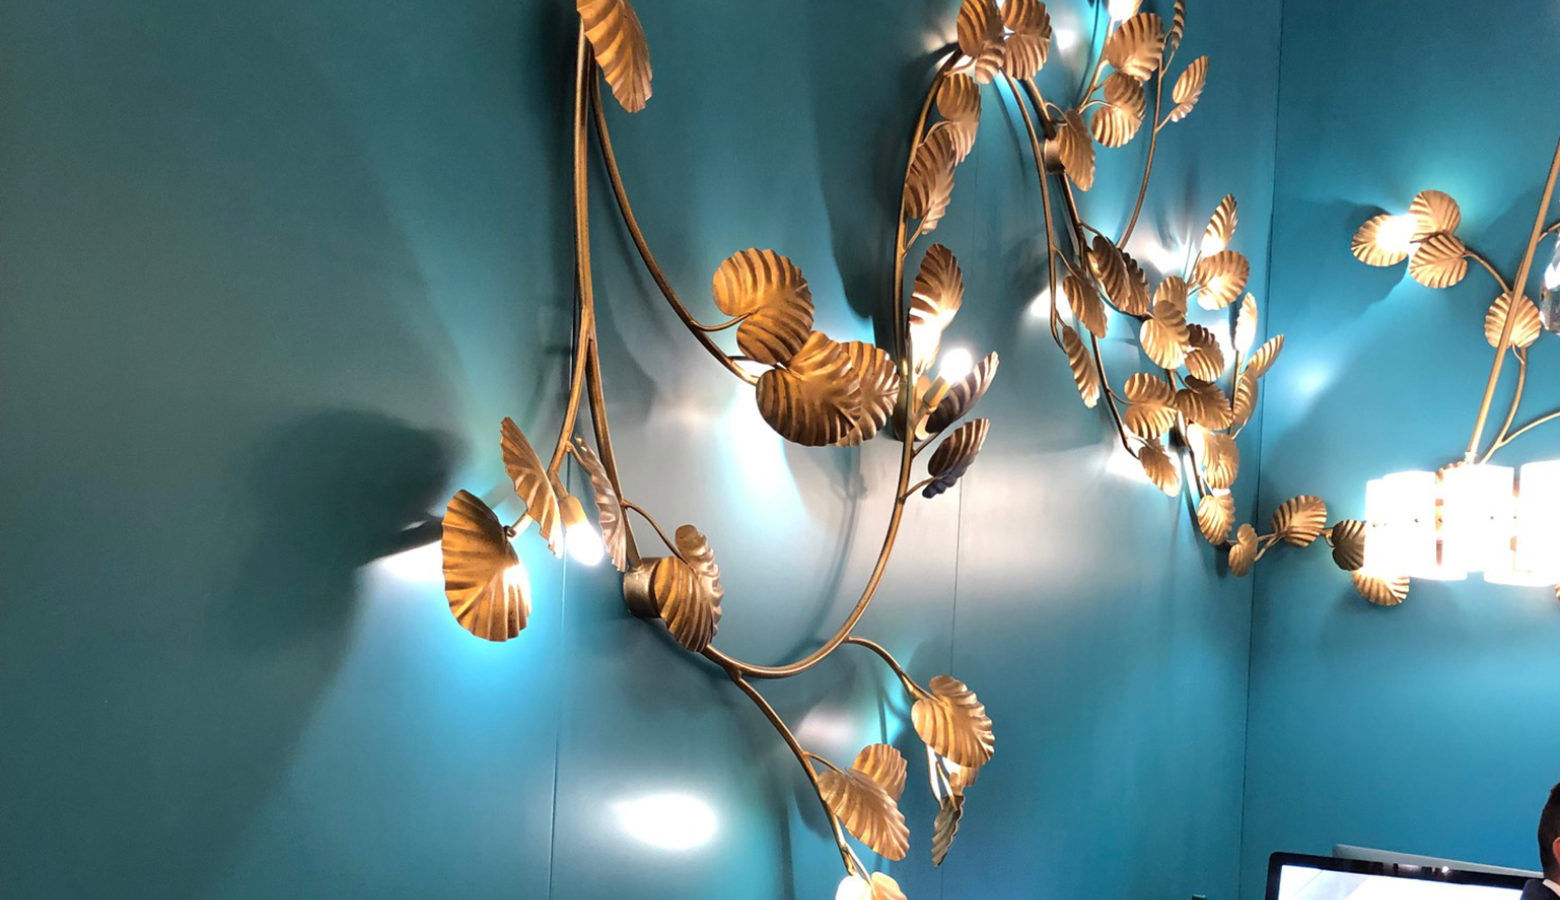 Contemporary Lighting Fixtures: Illuminating Ideas from Salone del Mobile Milan